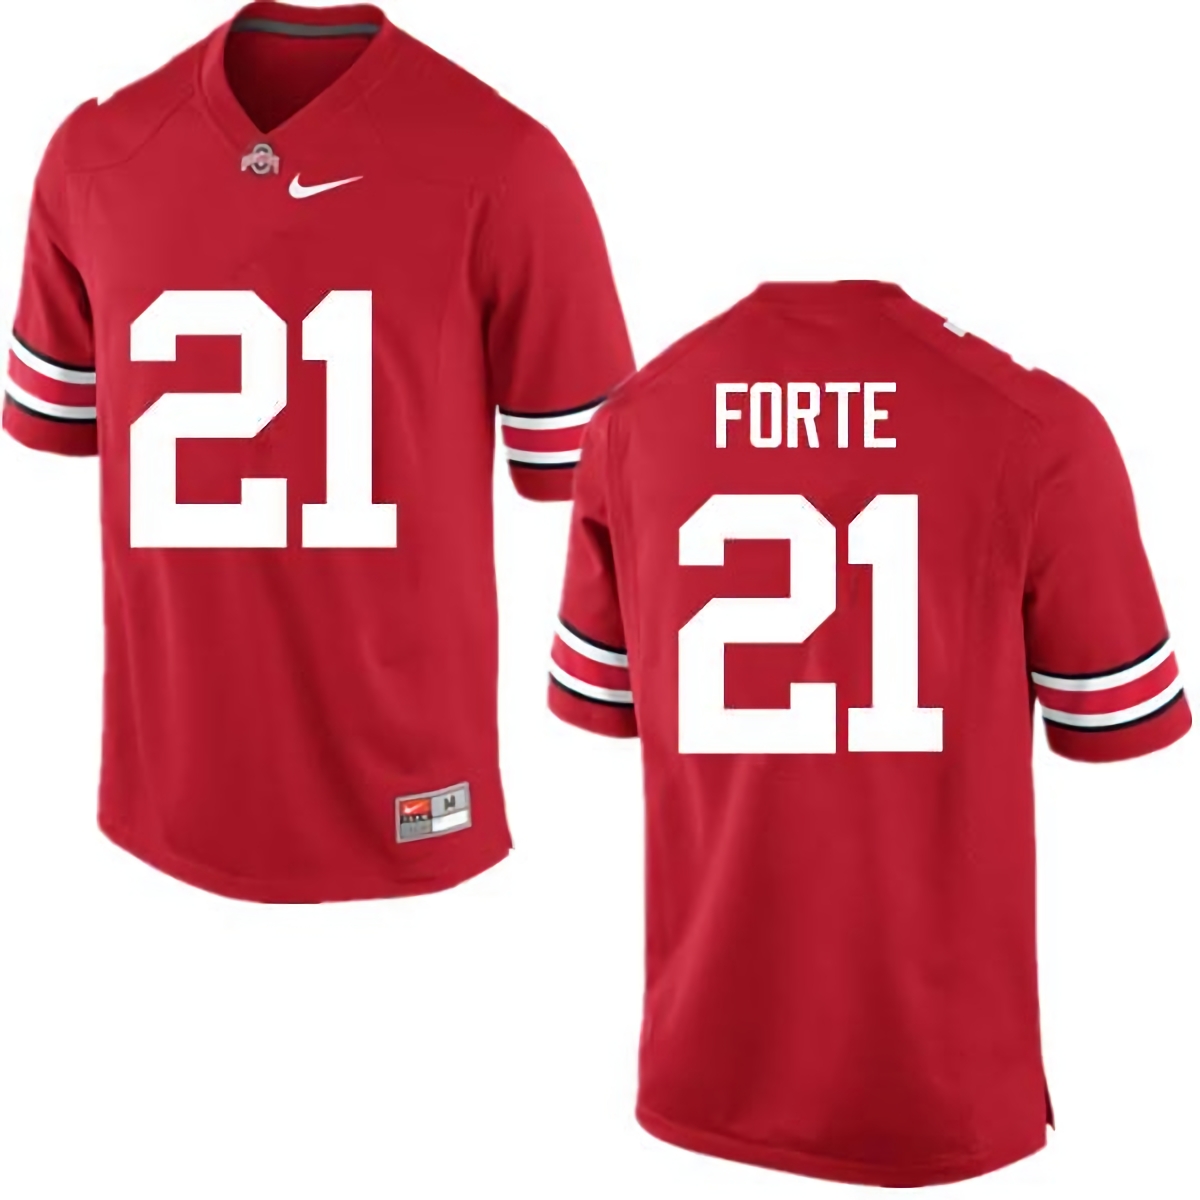 Trevon Forte Ohio State Buckeyes Men's NCAA #21 Nike Red College Stitched Football Jersey QOF6756XZ